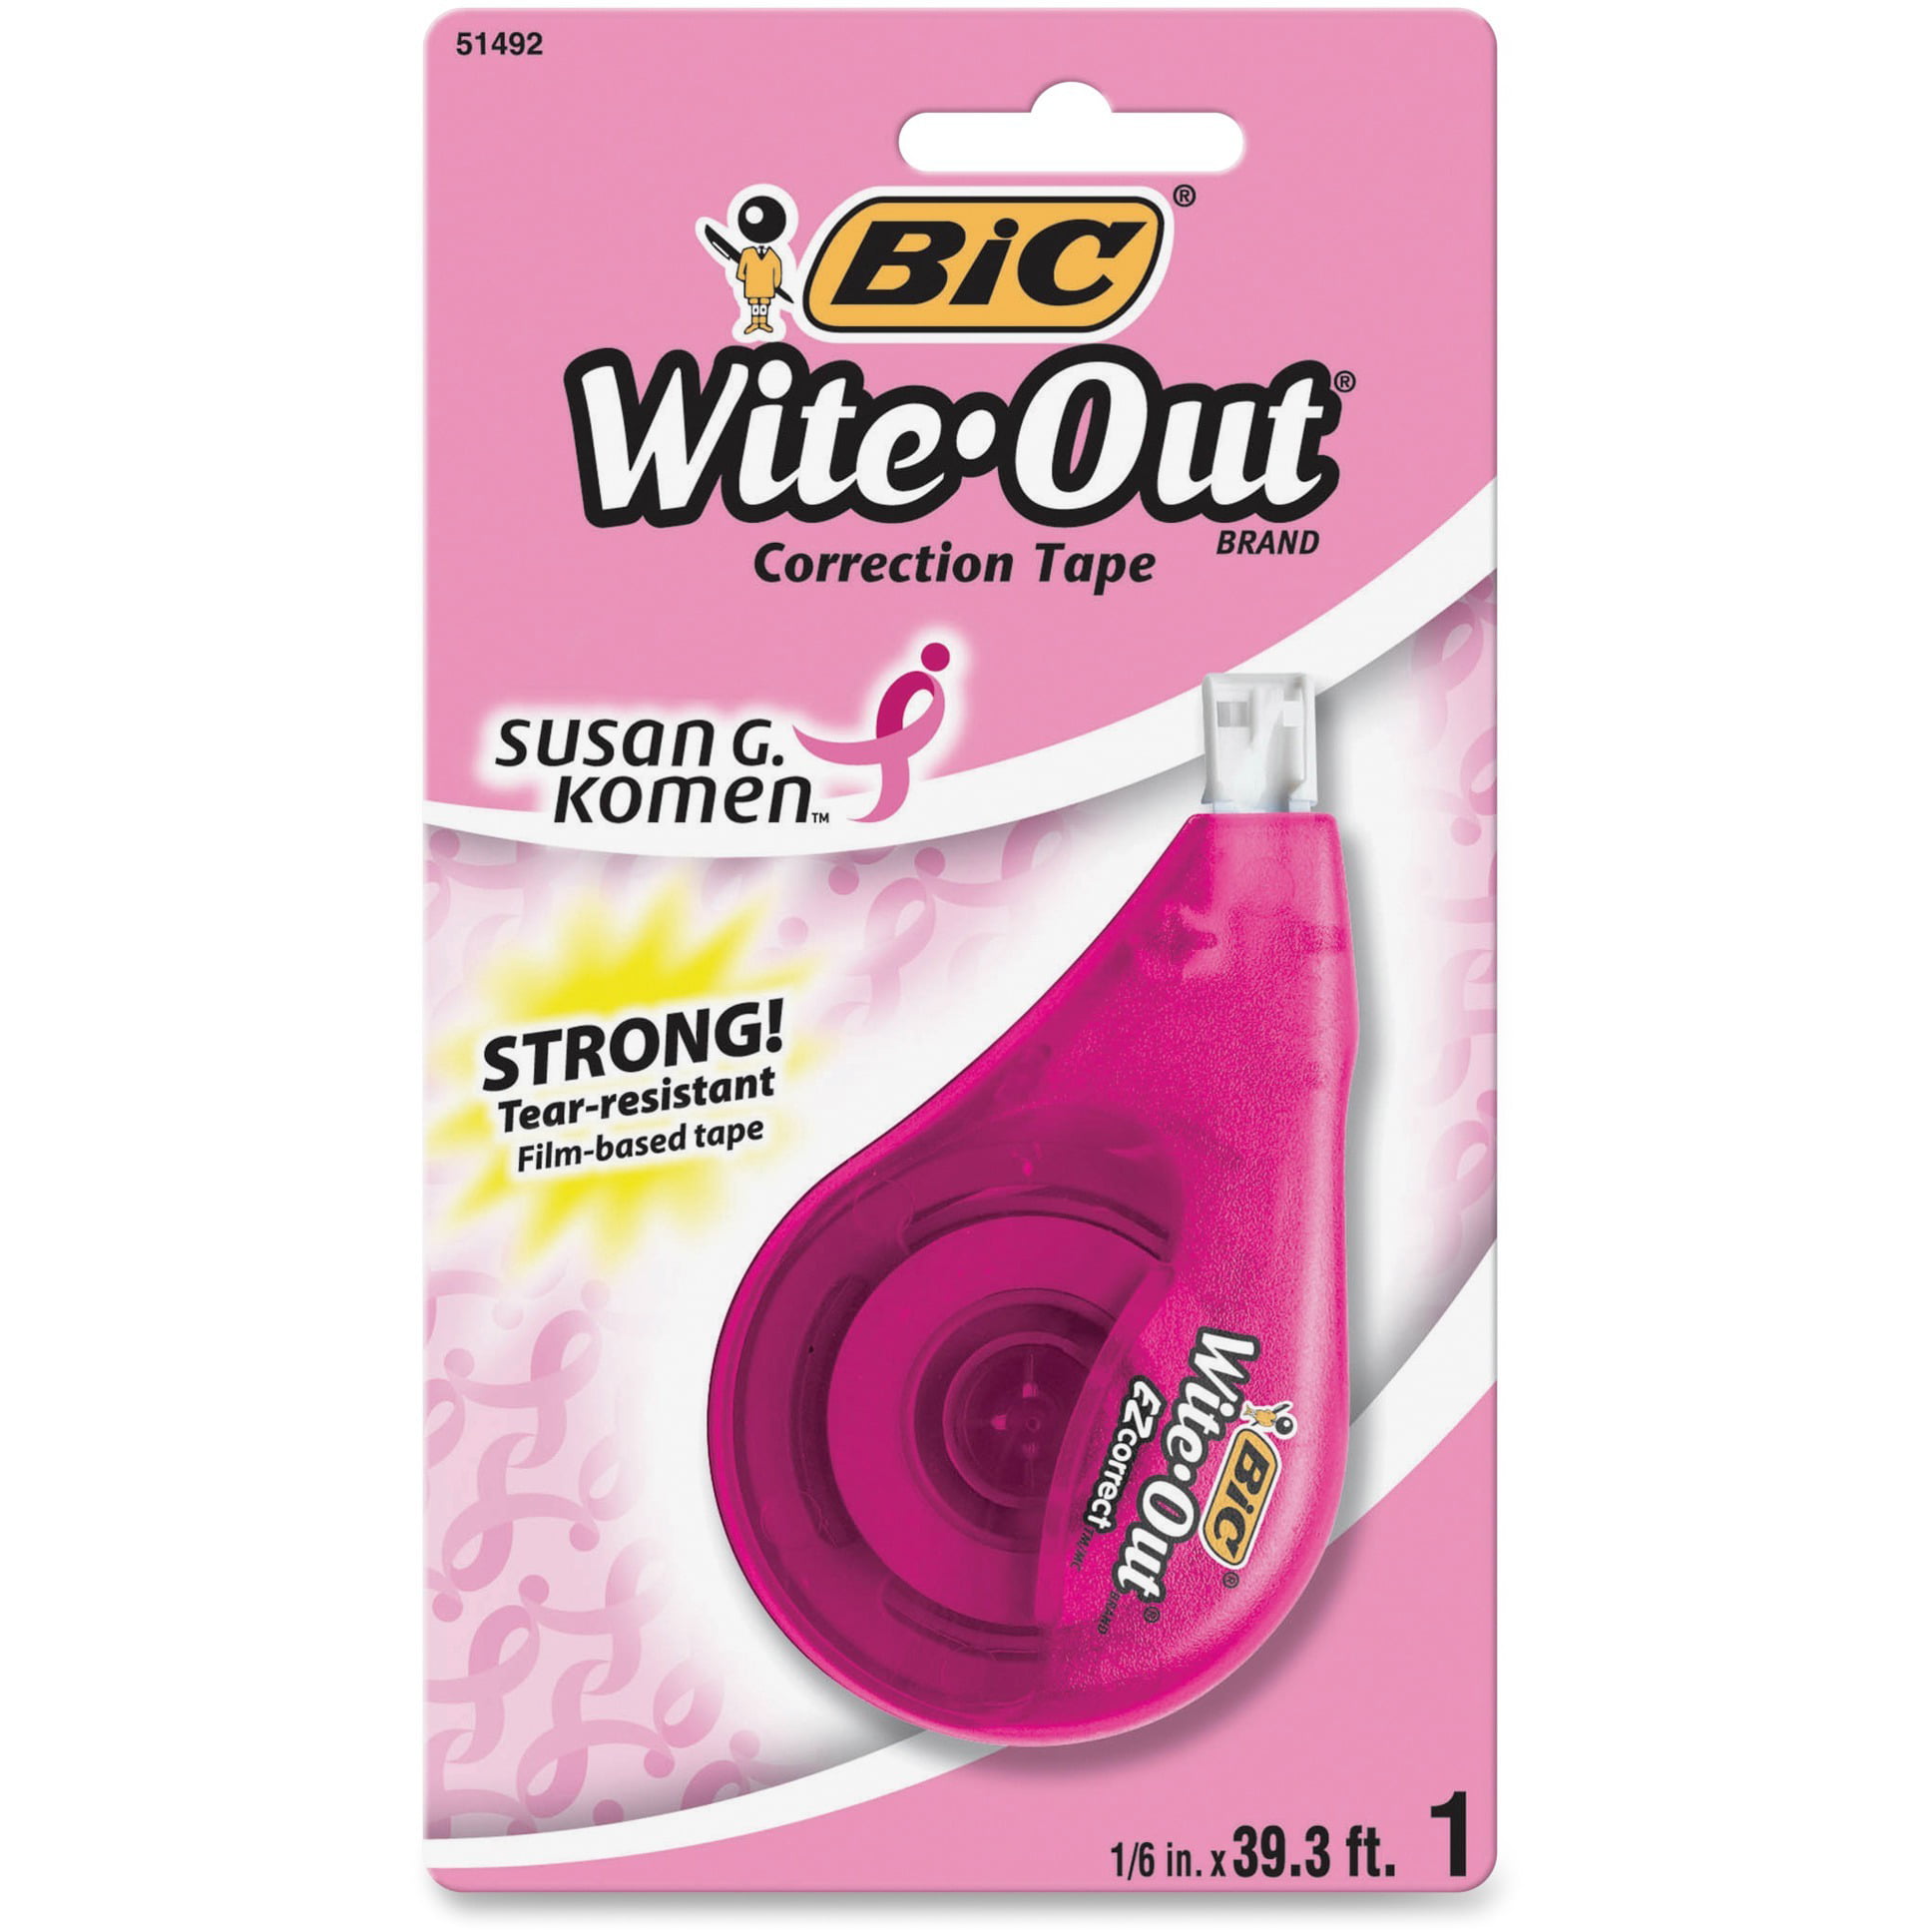 BIC Wite-Out EZ Correct Correction Tape - Supporting Susan G. Komen, 1/6 x  472, Pink 